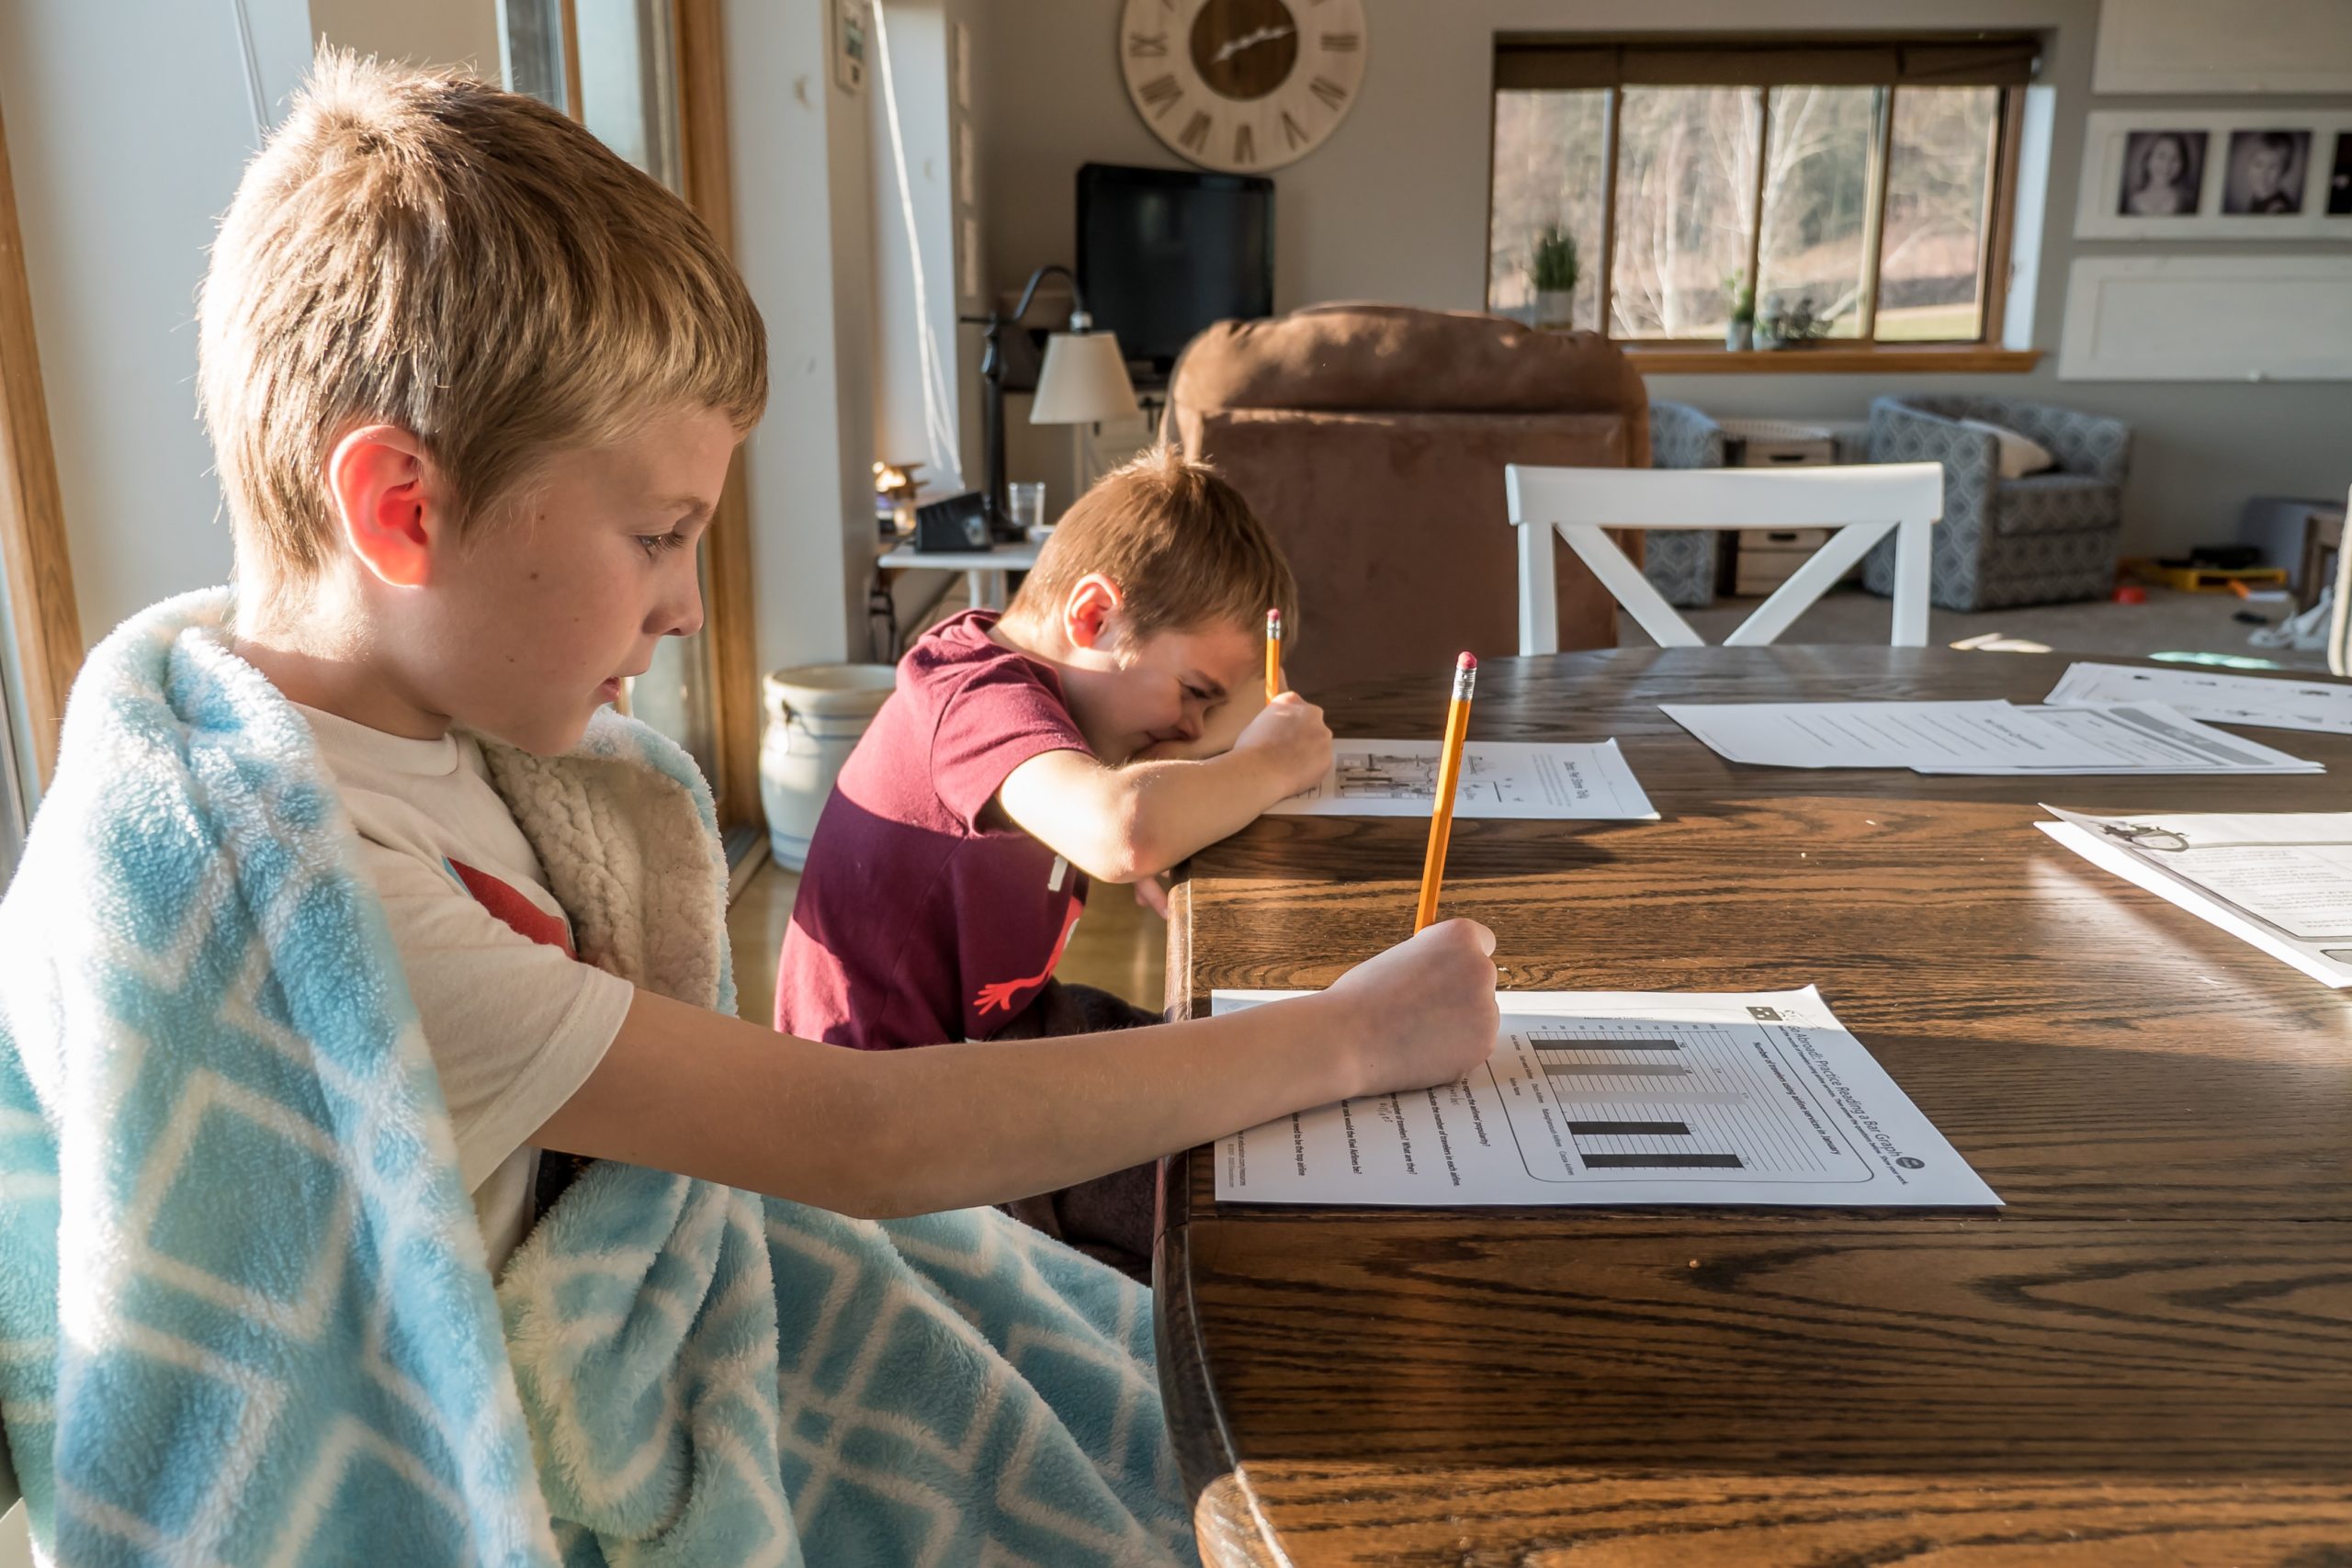 Should you continue homeschooling post-pandemic? The pros and cons